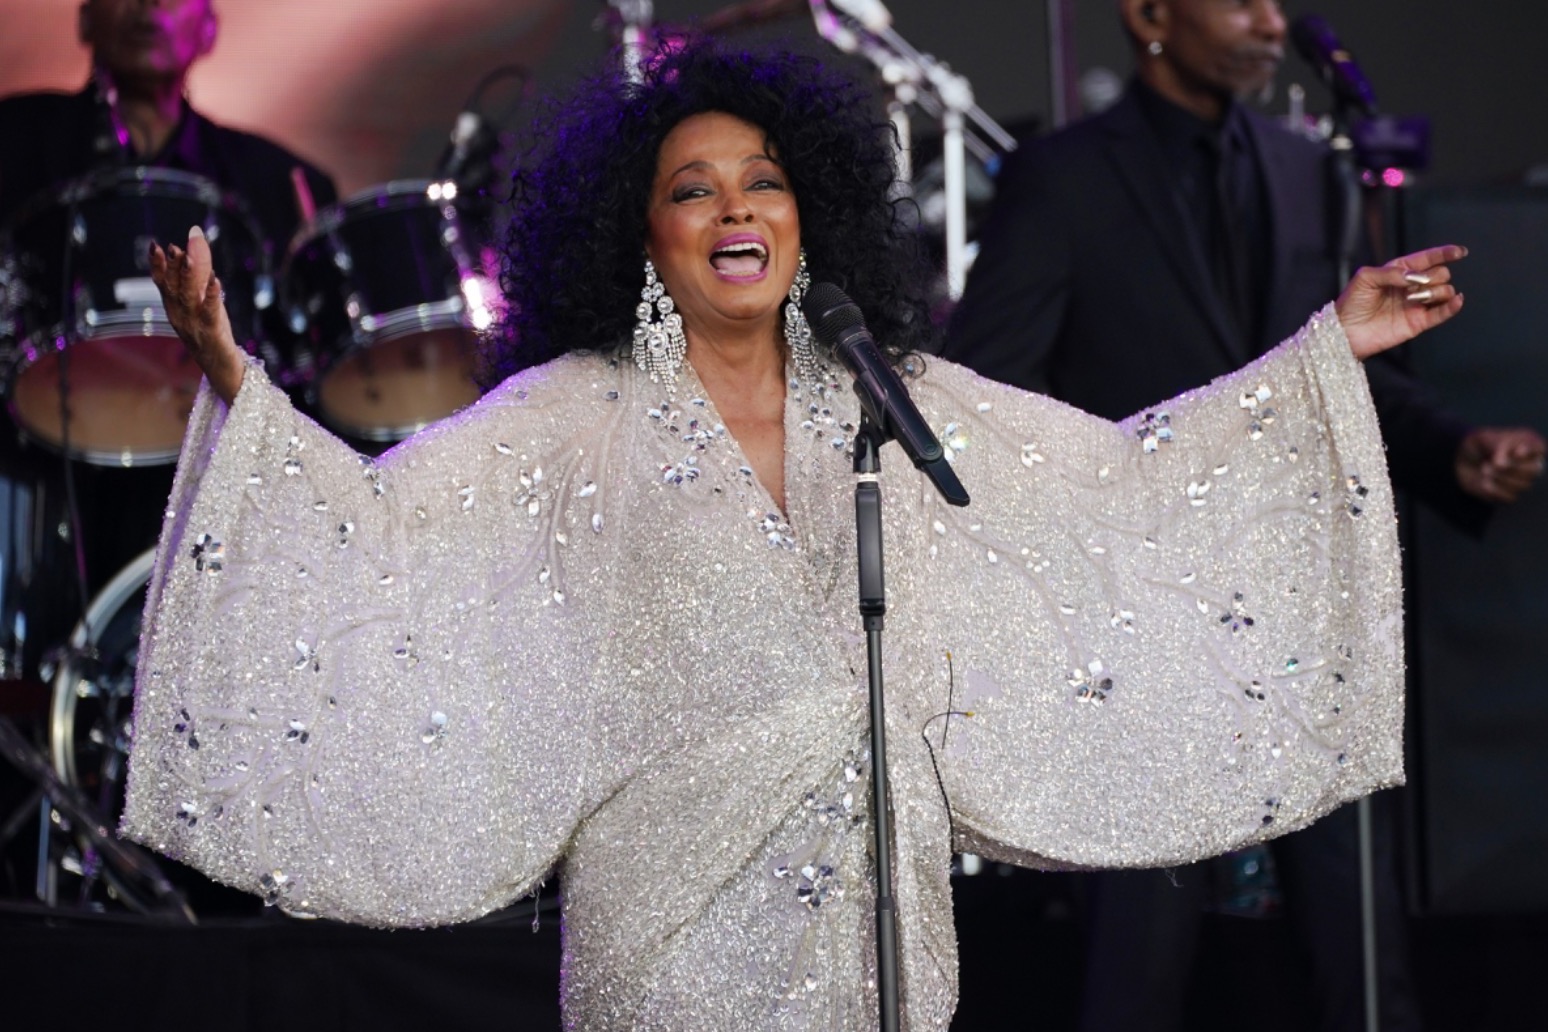 Diana Ross reels off the hits during legends slot at Glastonbury 